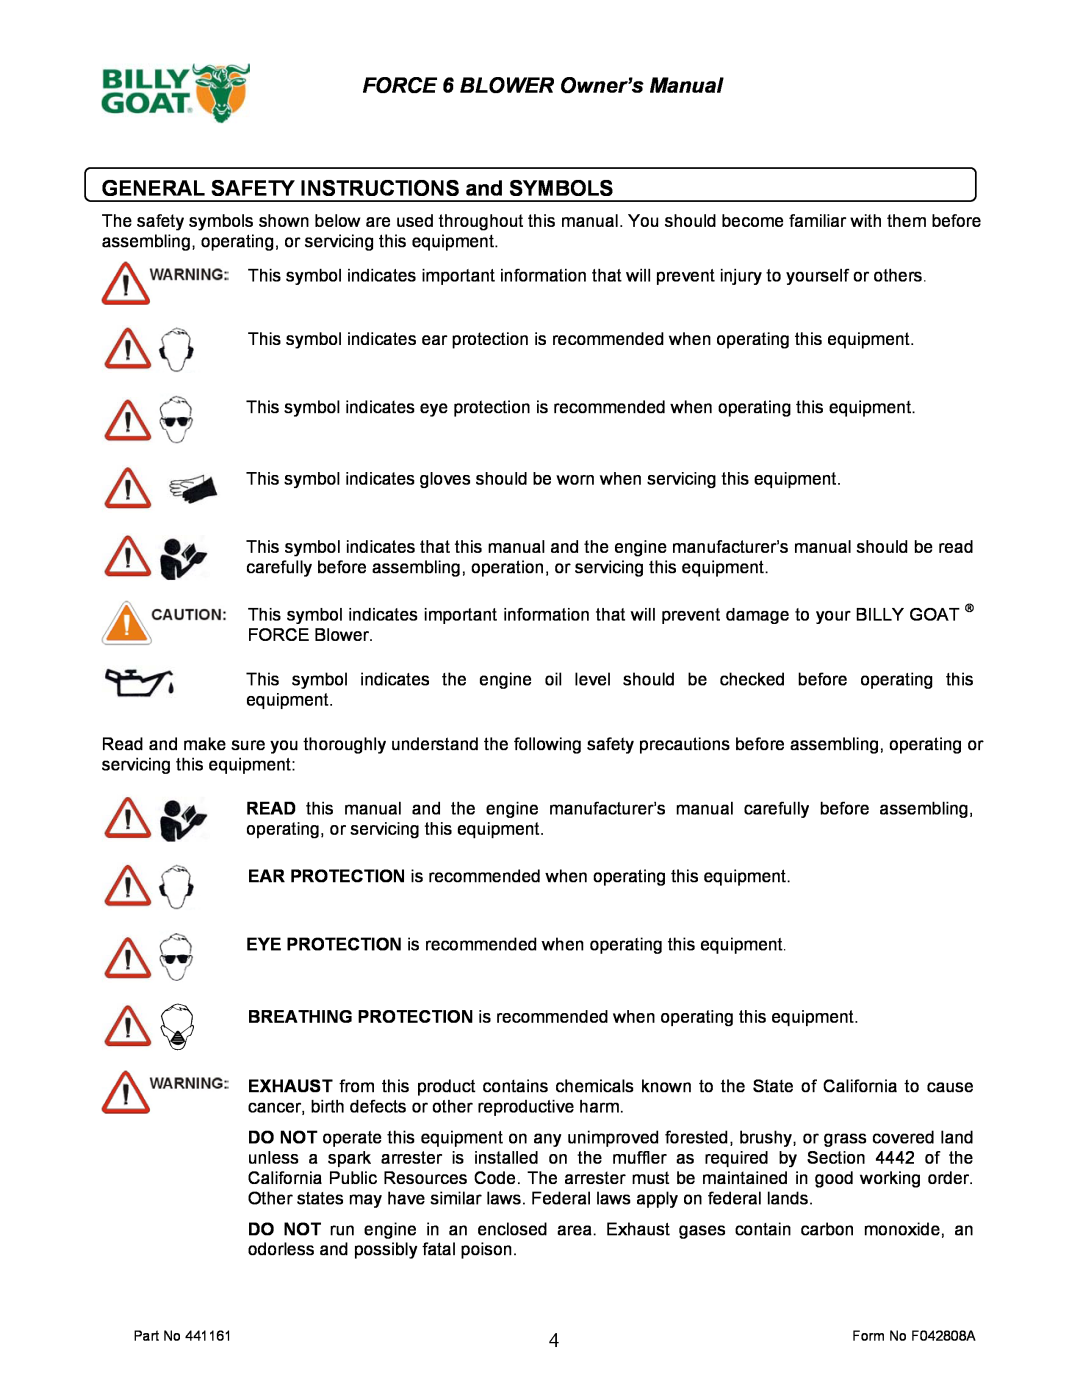 Billy Goat EX17D50012 owner manual GENERAL SAFETY INSTRUCTIONS and SYMBOLS 